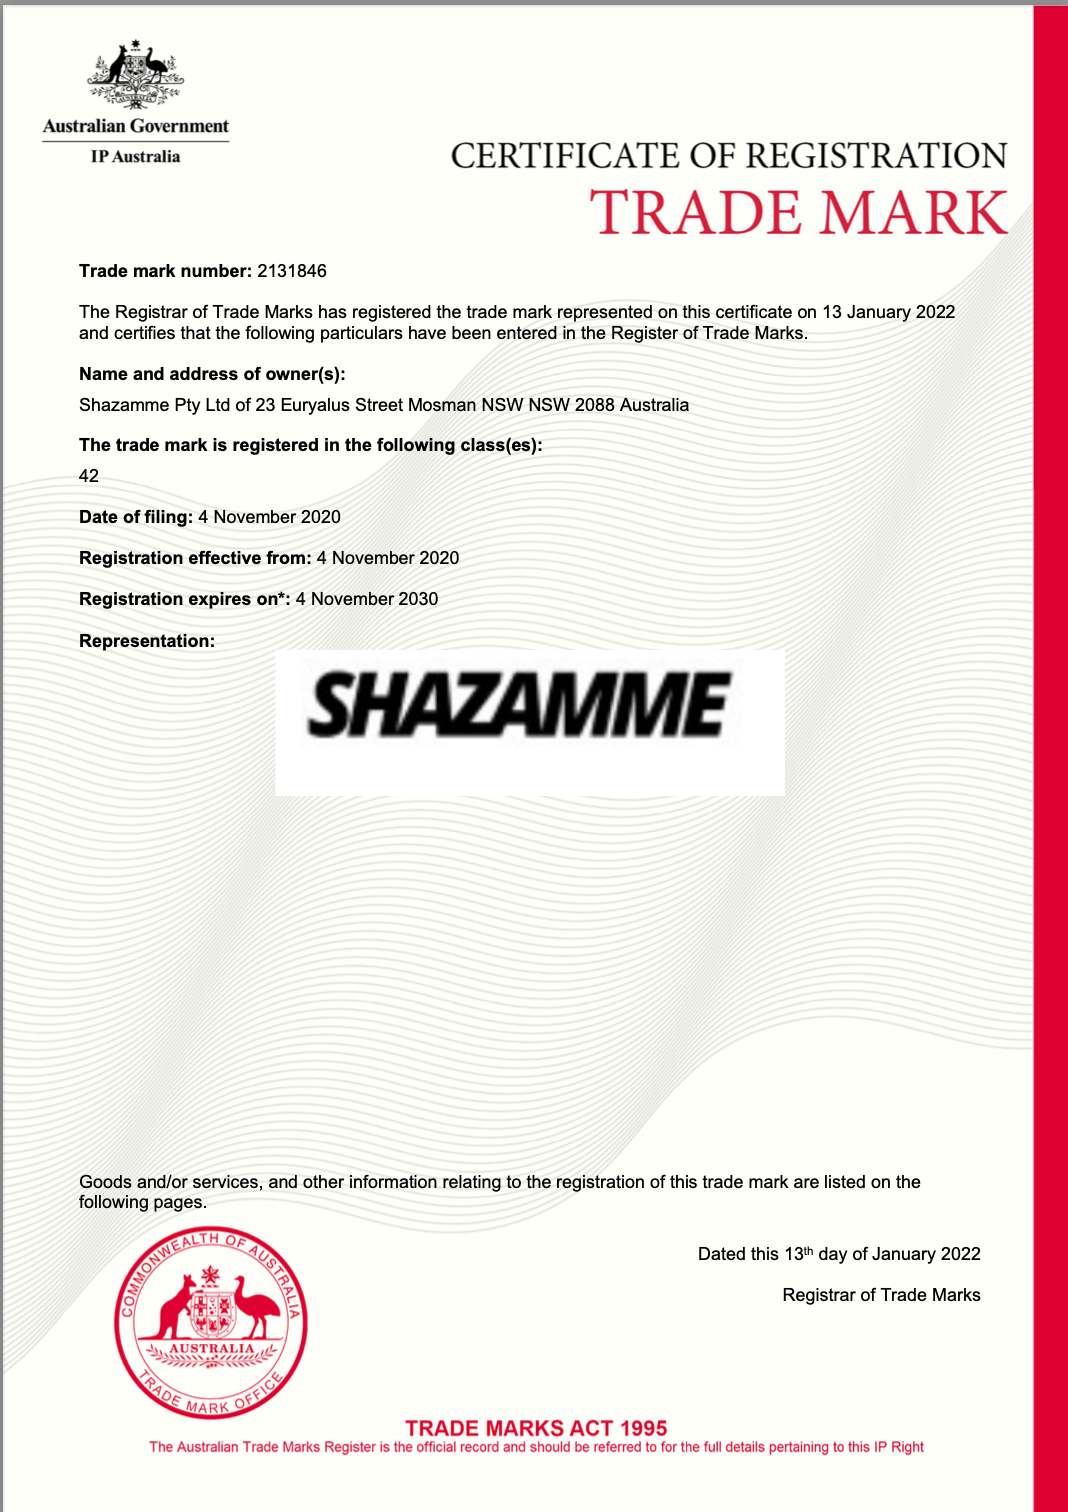 It is a certificate of registration for a trademark.